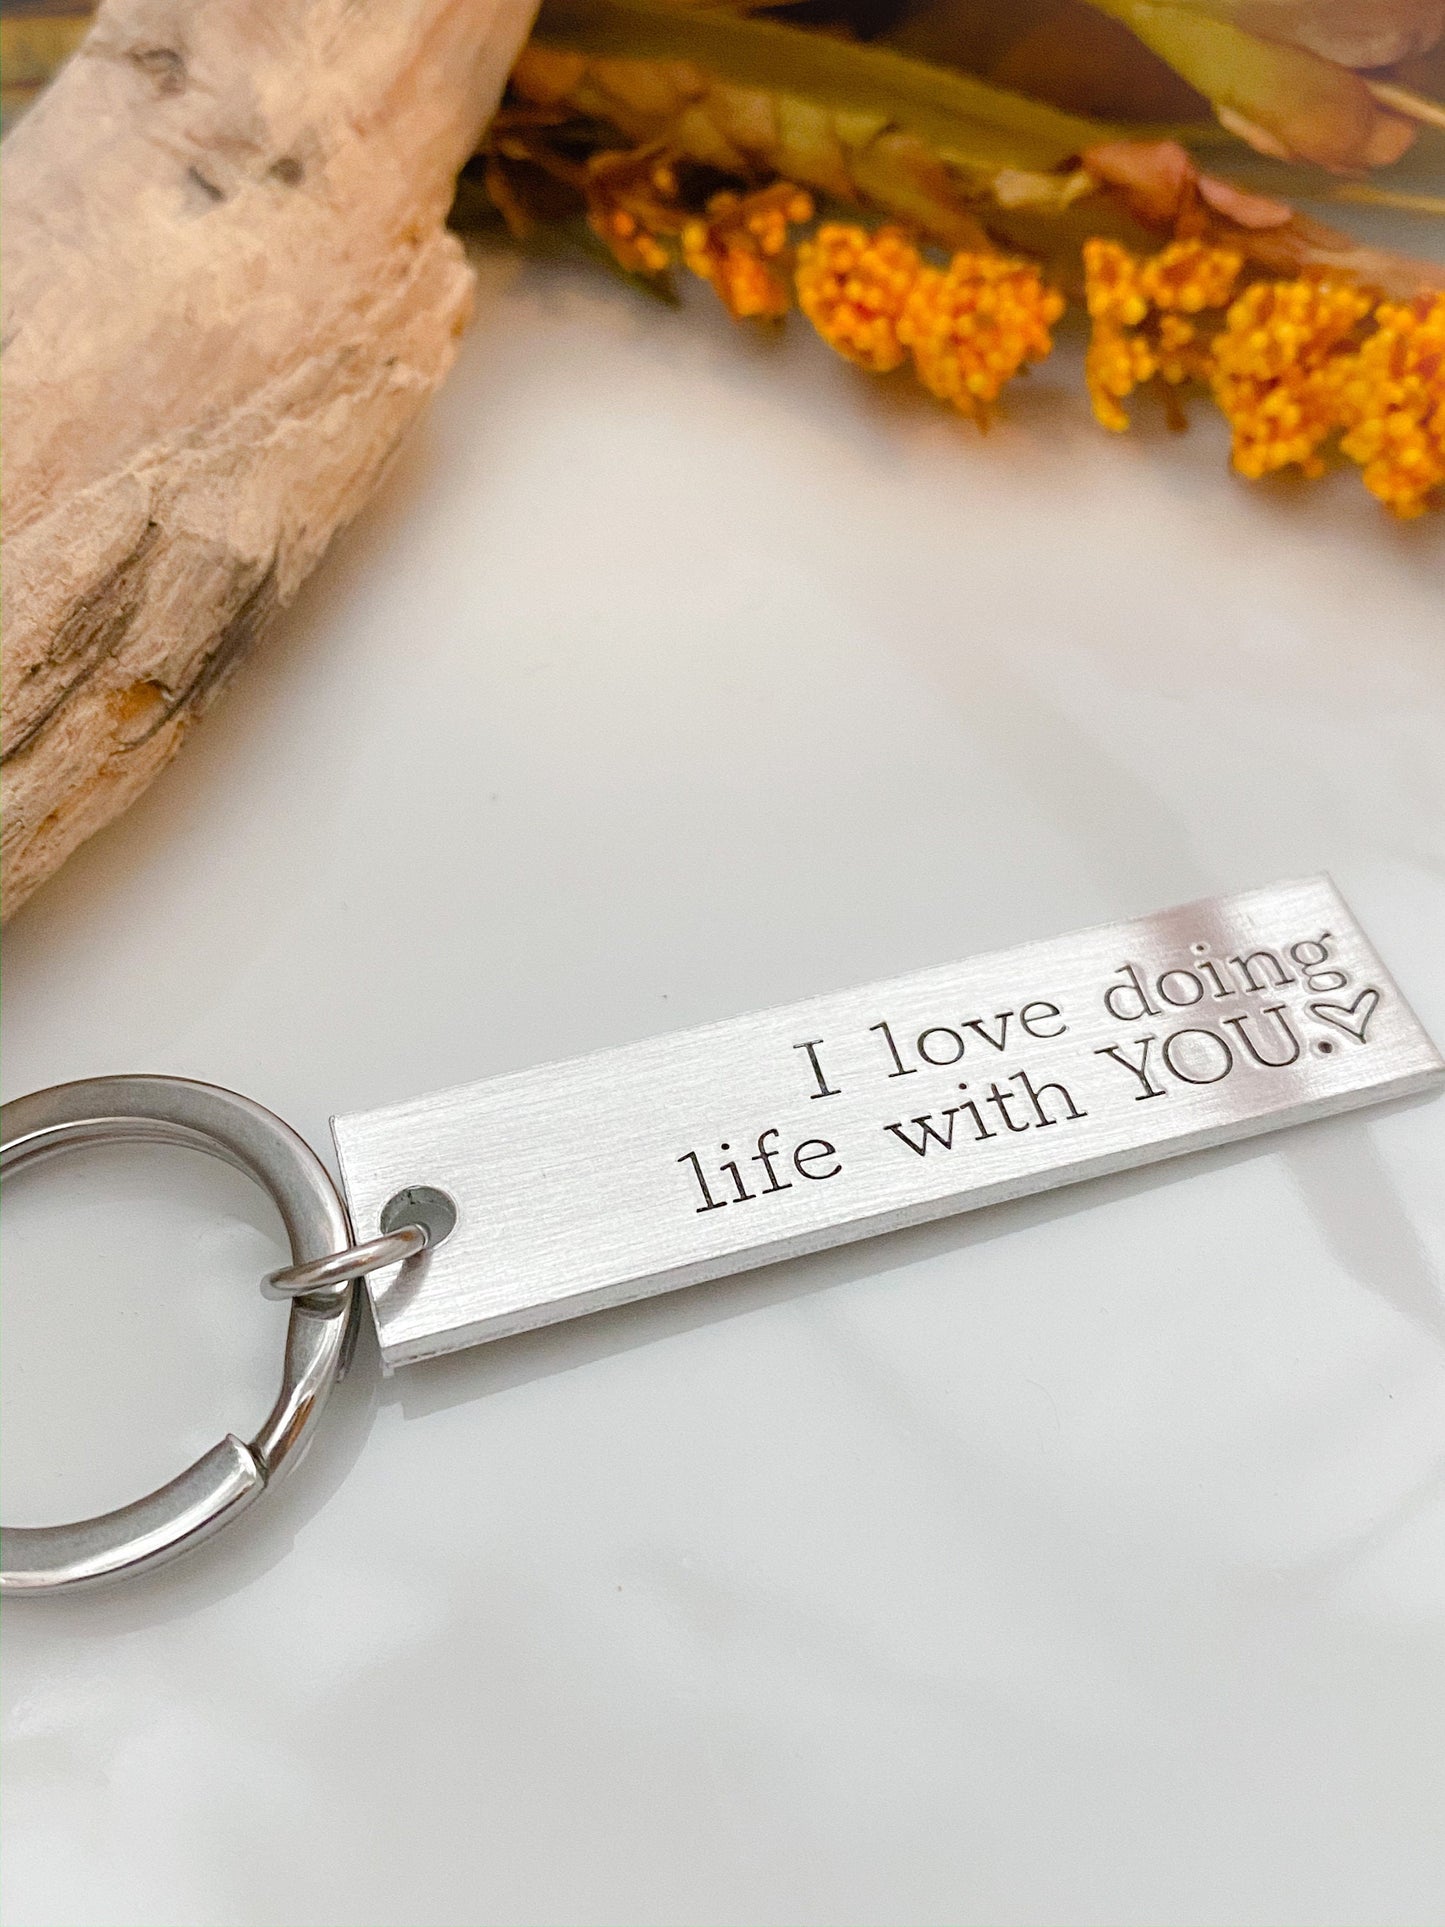 I love doing life with you keychain--Husband Gift--Boyfriend Gift--anniversary gift-Valentine’s Day gift-personalized gift-I love you